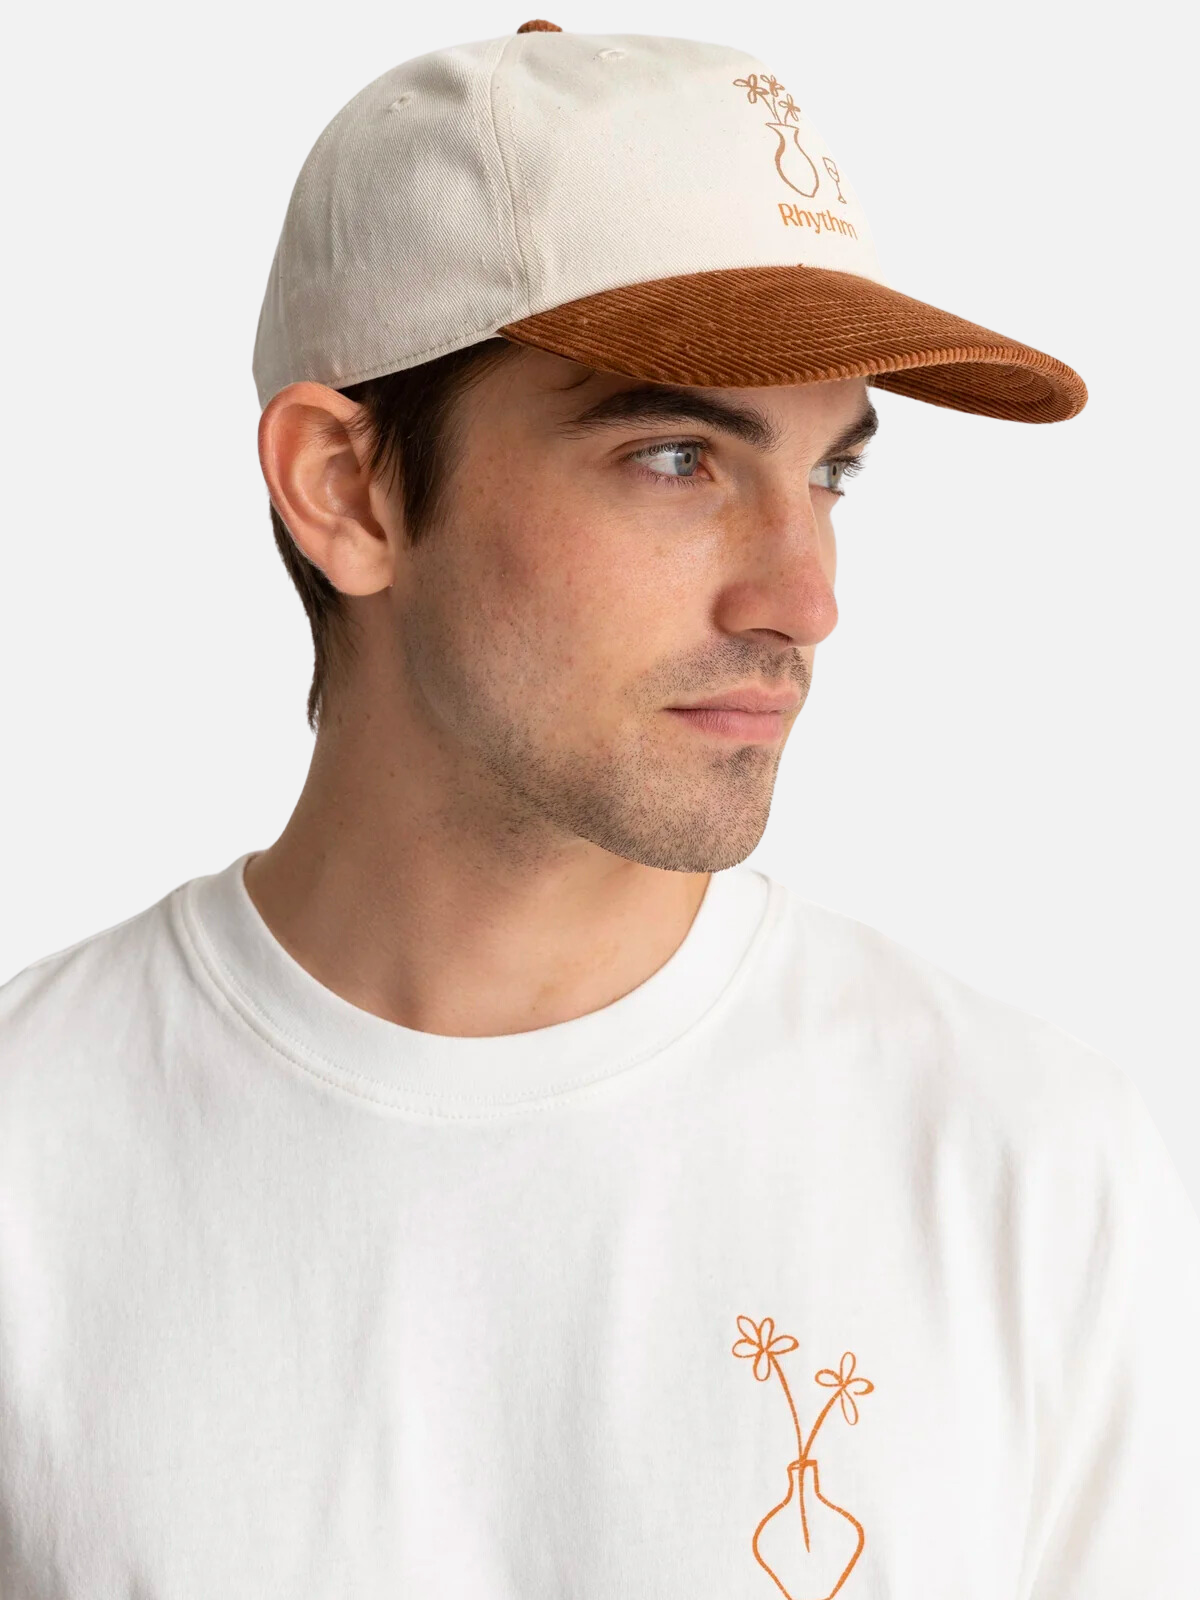 rhythm day off cap tobacco white brown town orange embroidered graphic corduroy bill cotton canvas hat one size fits all kempt athens ga georgia men's clothing store